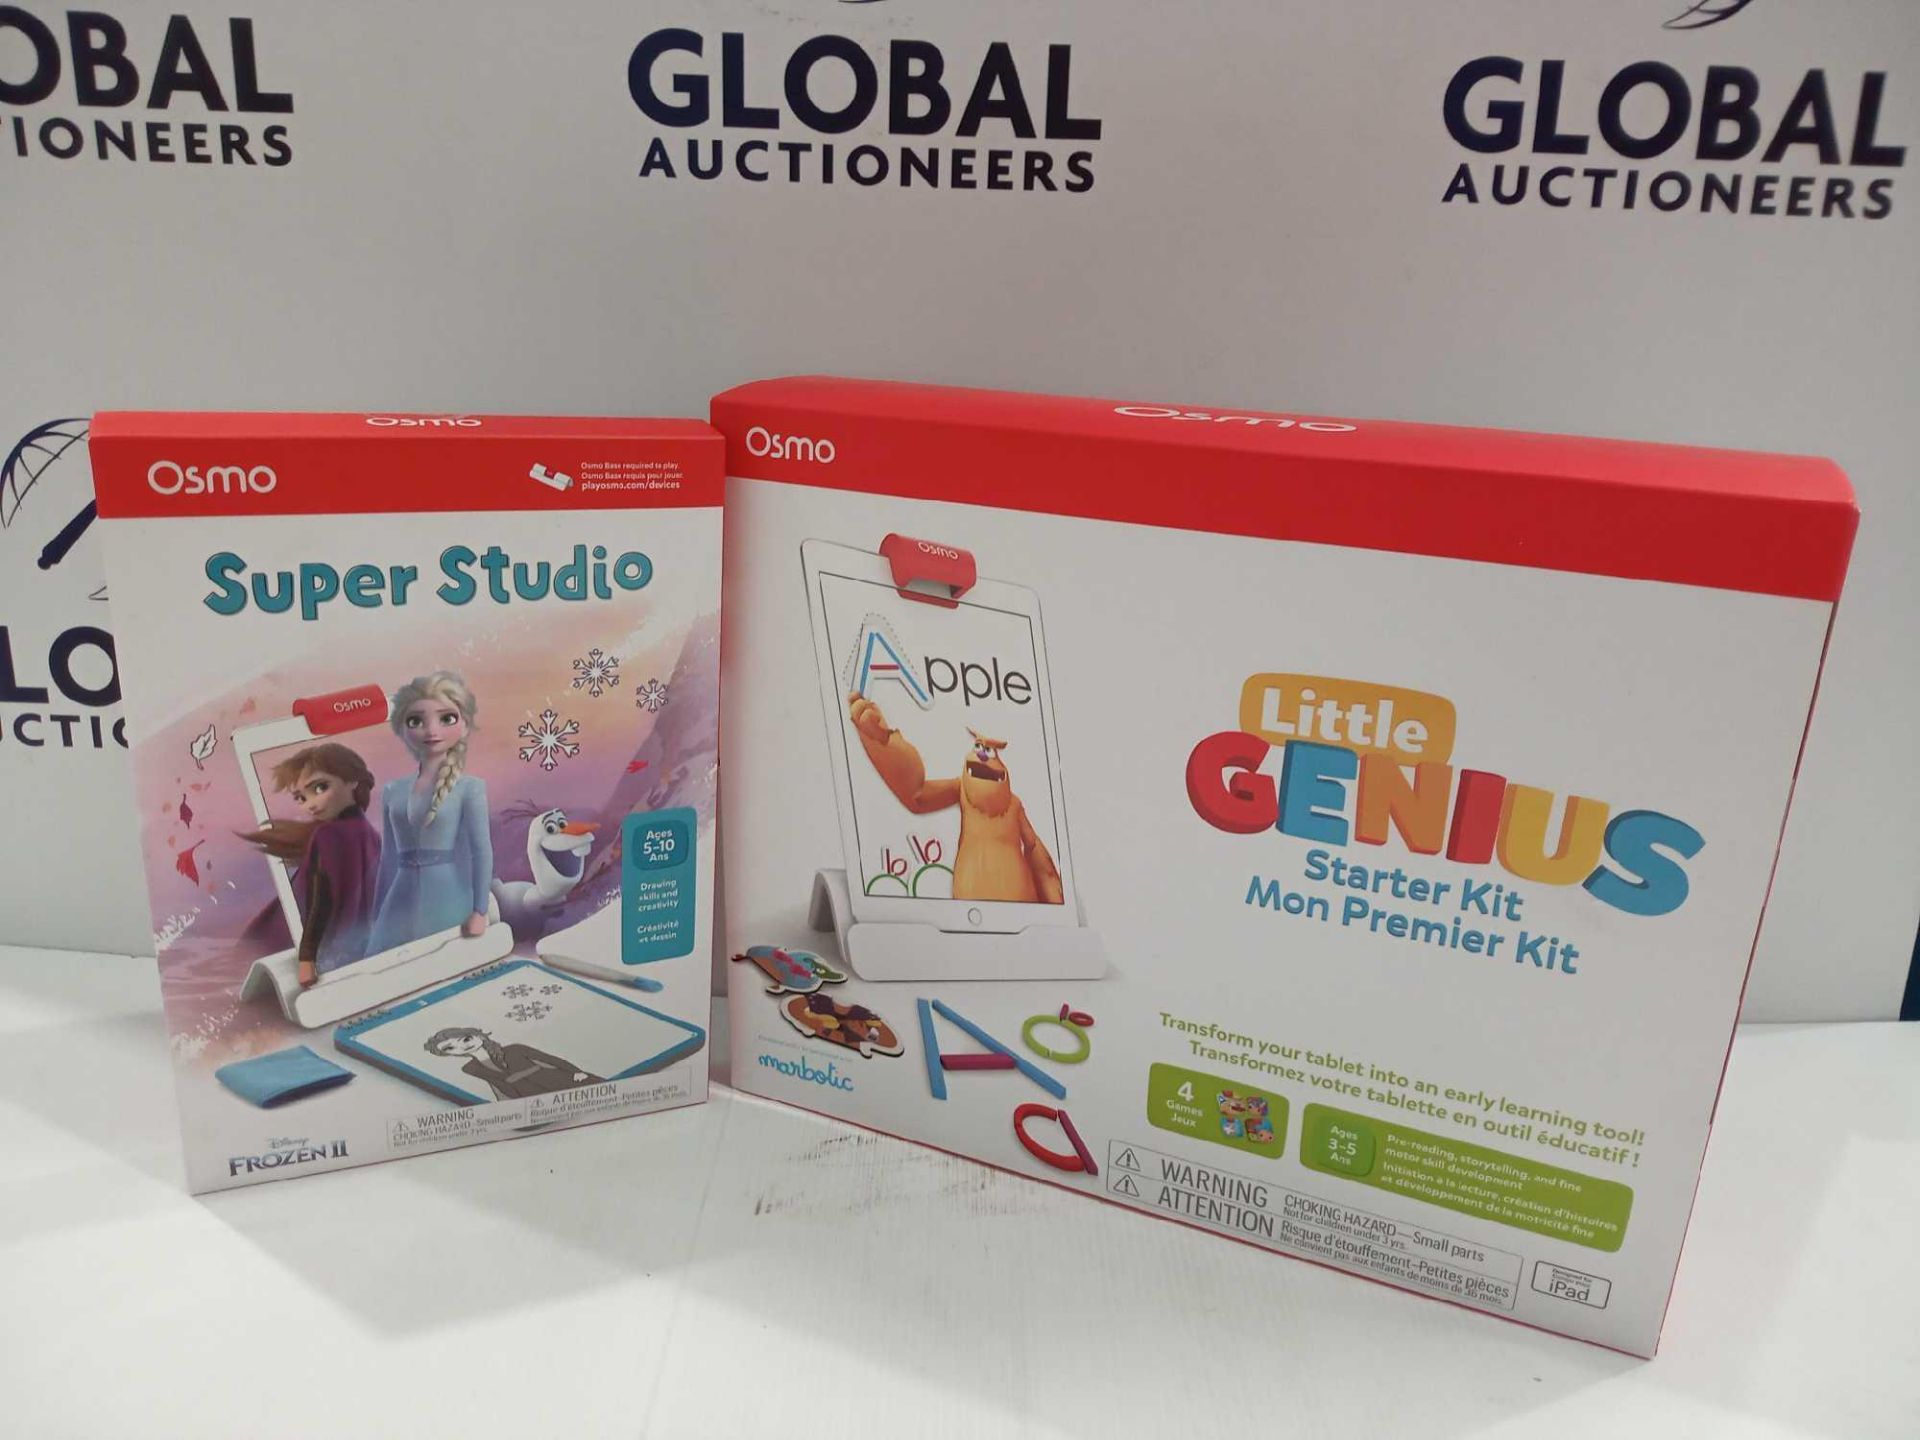 Rrp £130 Boxed Osmo Little Genius Products Handheld Starter Kit Complete With Osmo Super Studio Disn - Image 2 of 2